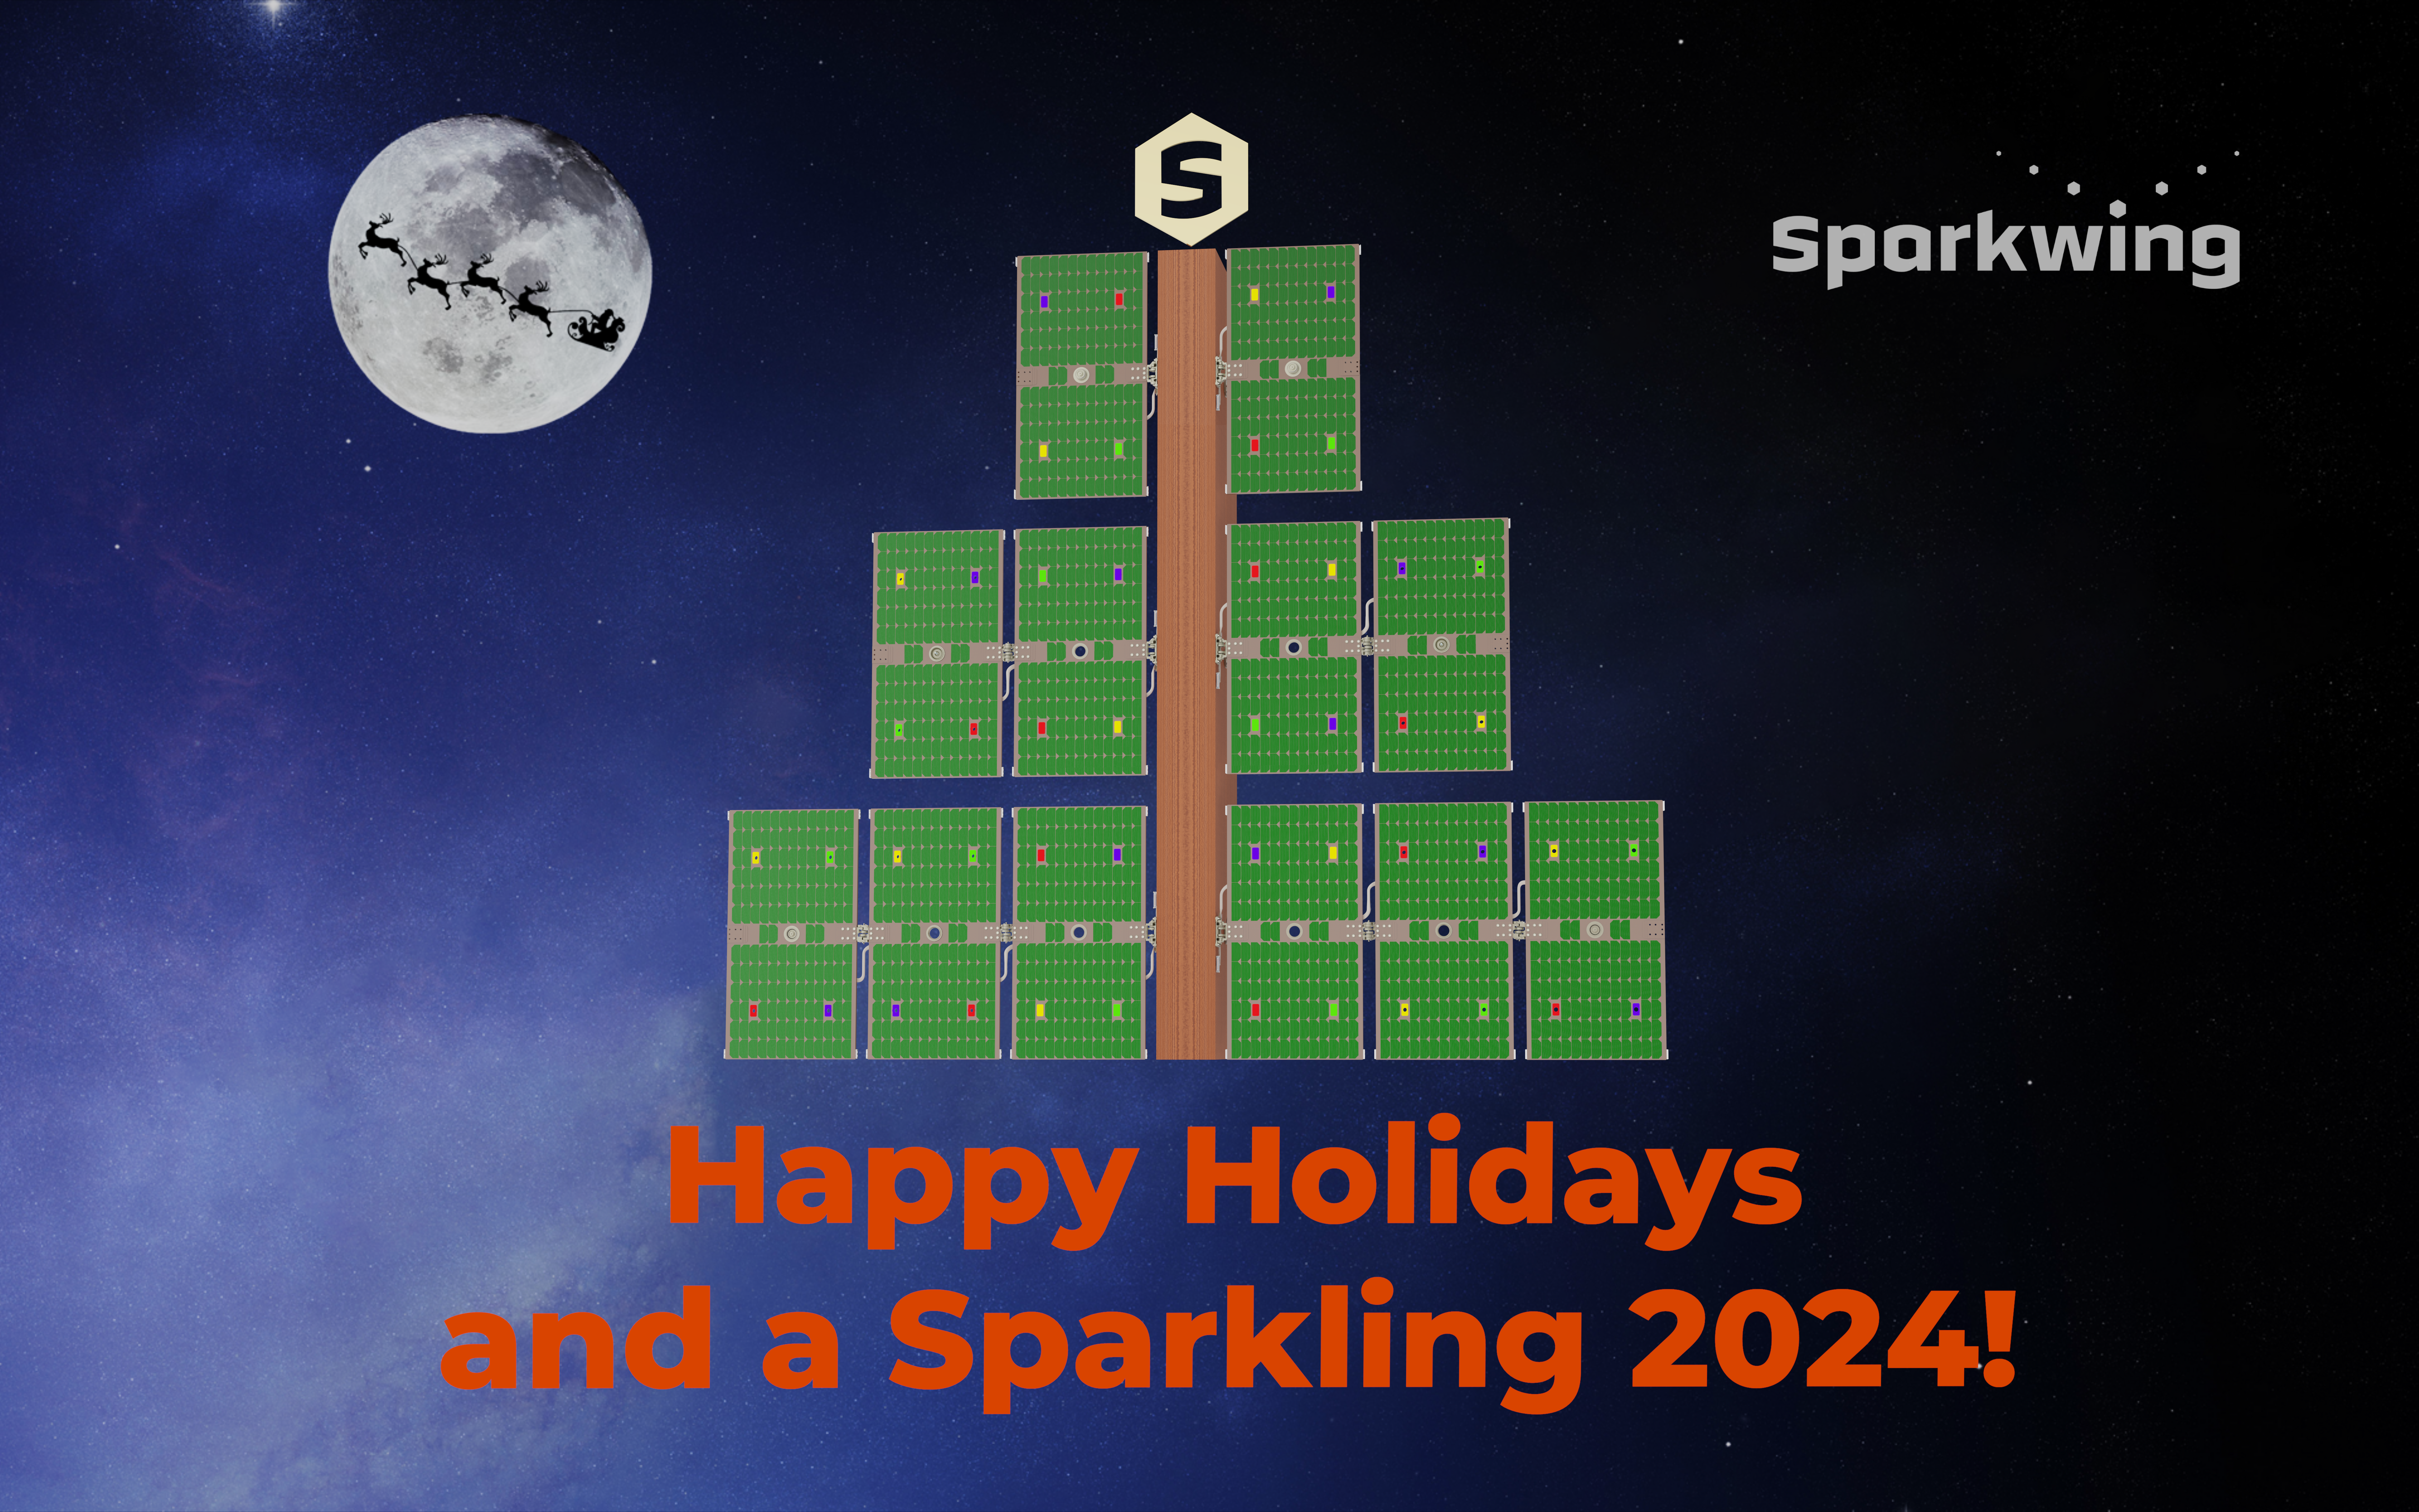 Happy Holidays and a Sparkling 2024!